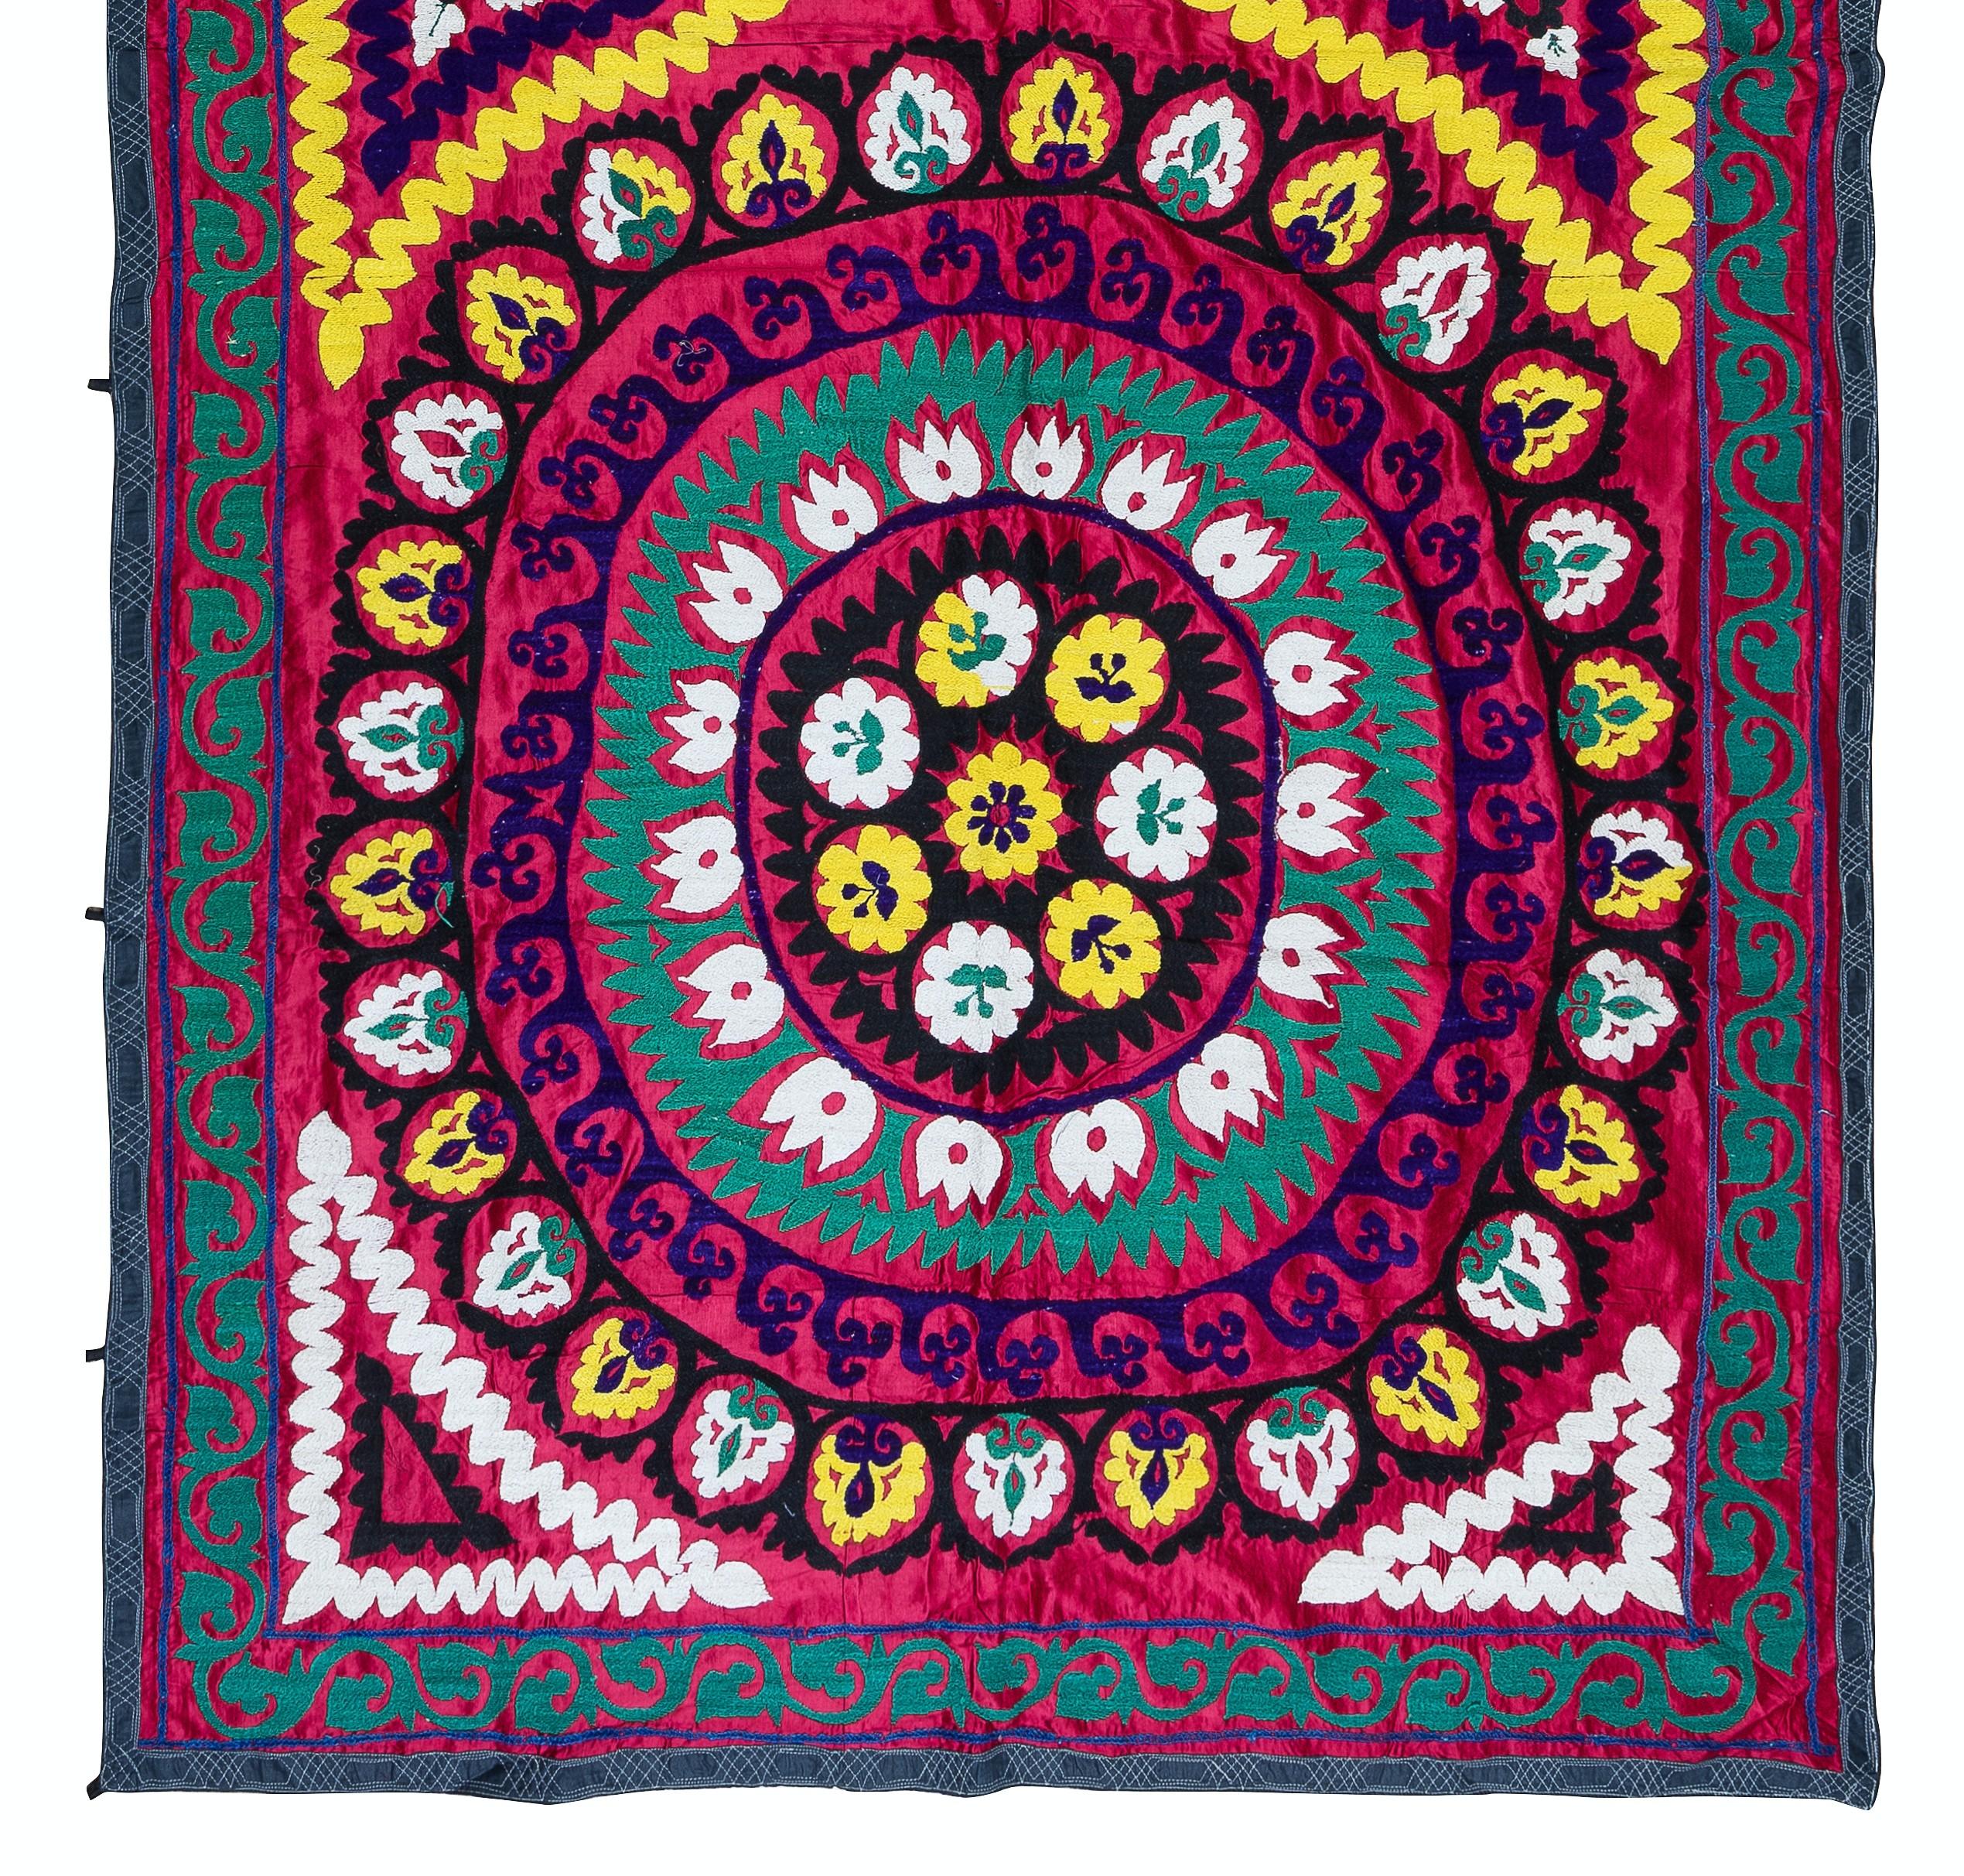 Uzbek 4.7x9.6 ft Vintage Suzani Fabric Wall Hanging, Hand Embroidered Cotton Bed Cover